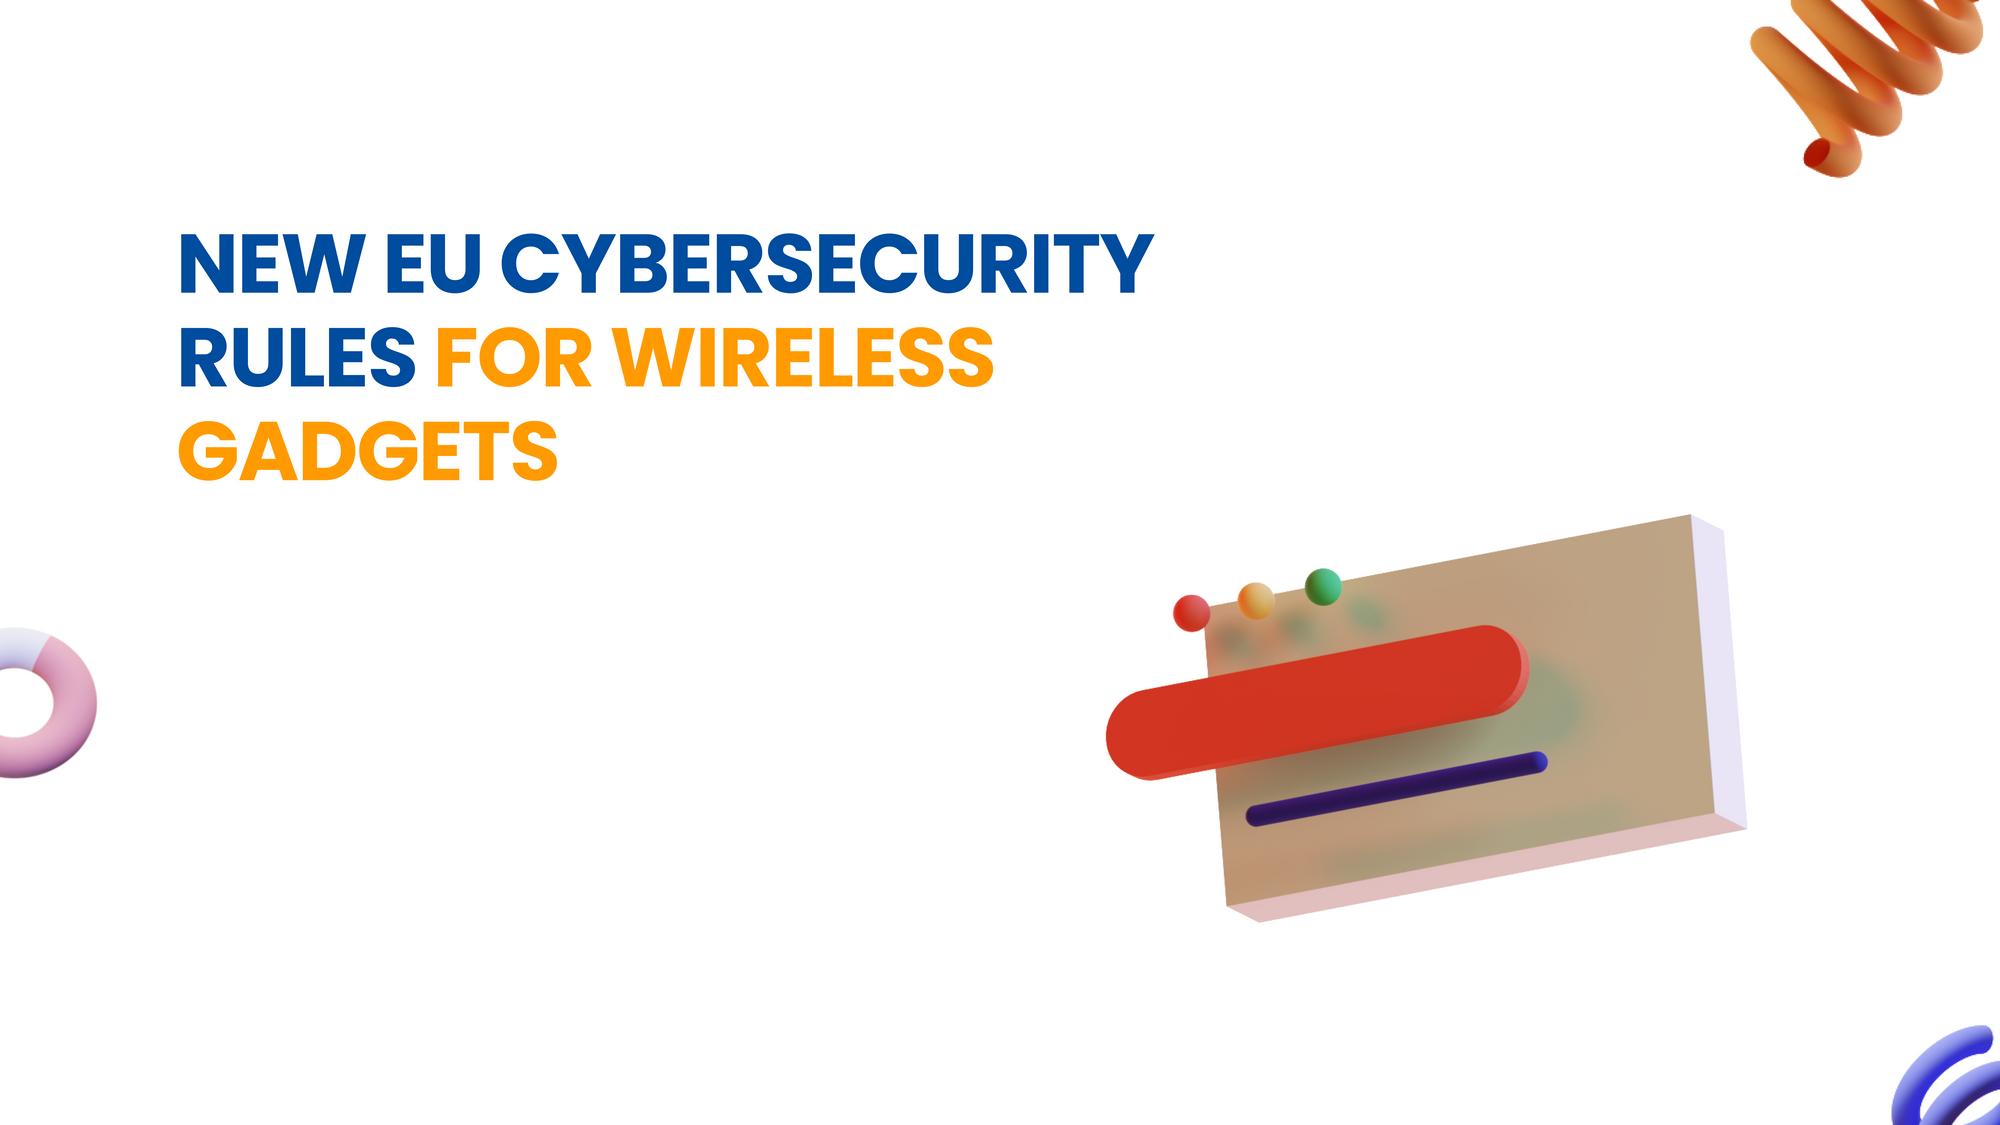 New EU cybersecurity rules for wireless gadgets